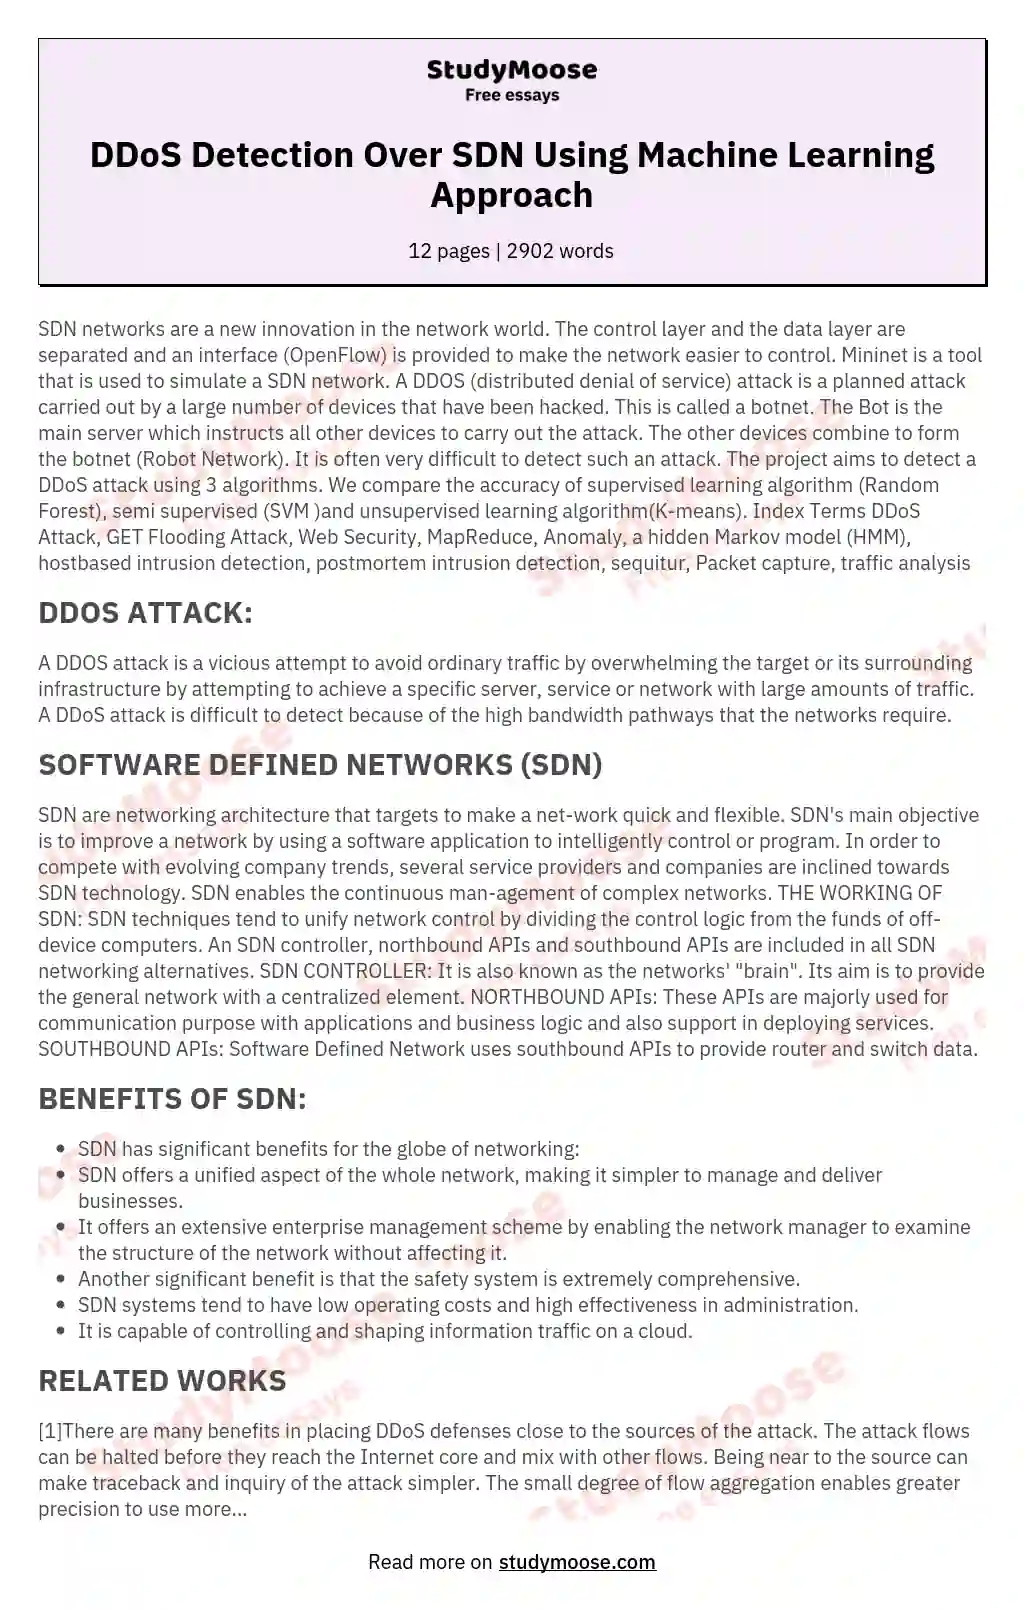 DDoS Detection Over SDN Using Machine Learning Approach